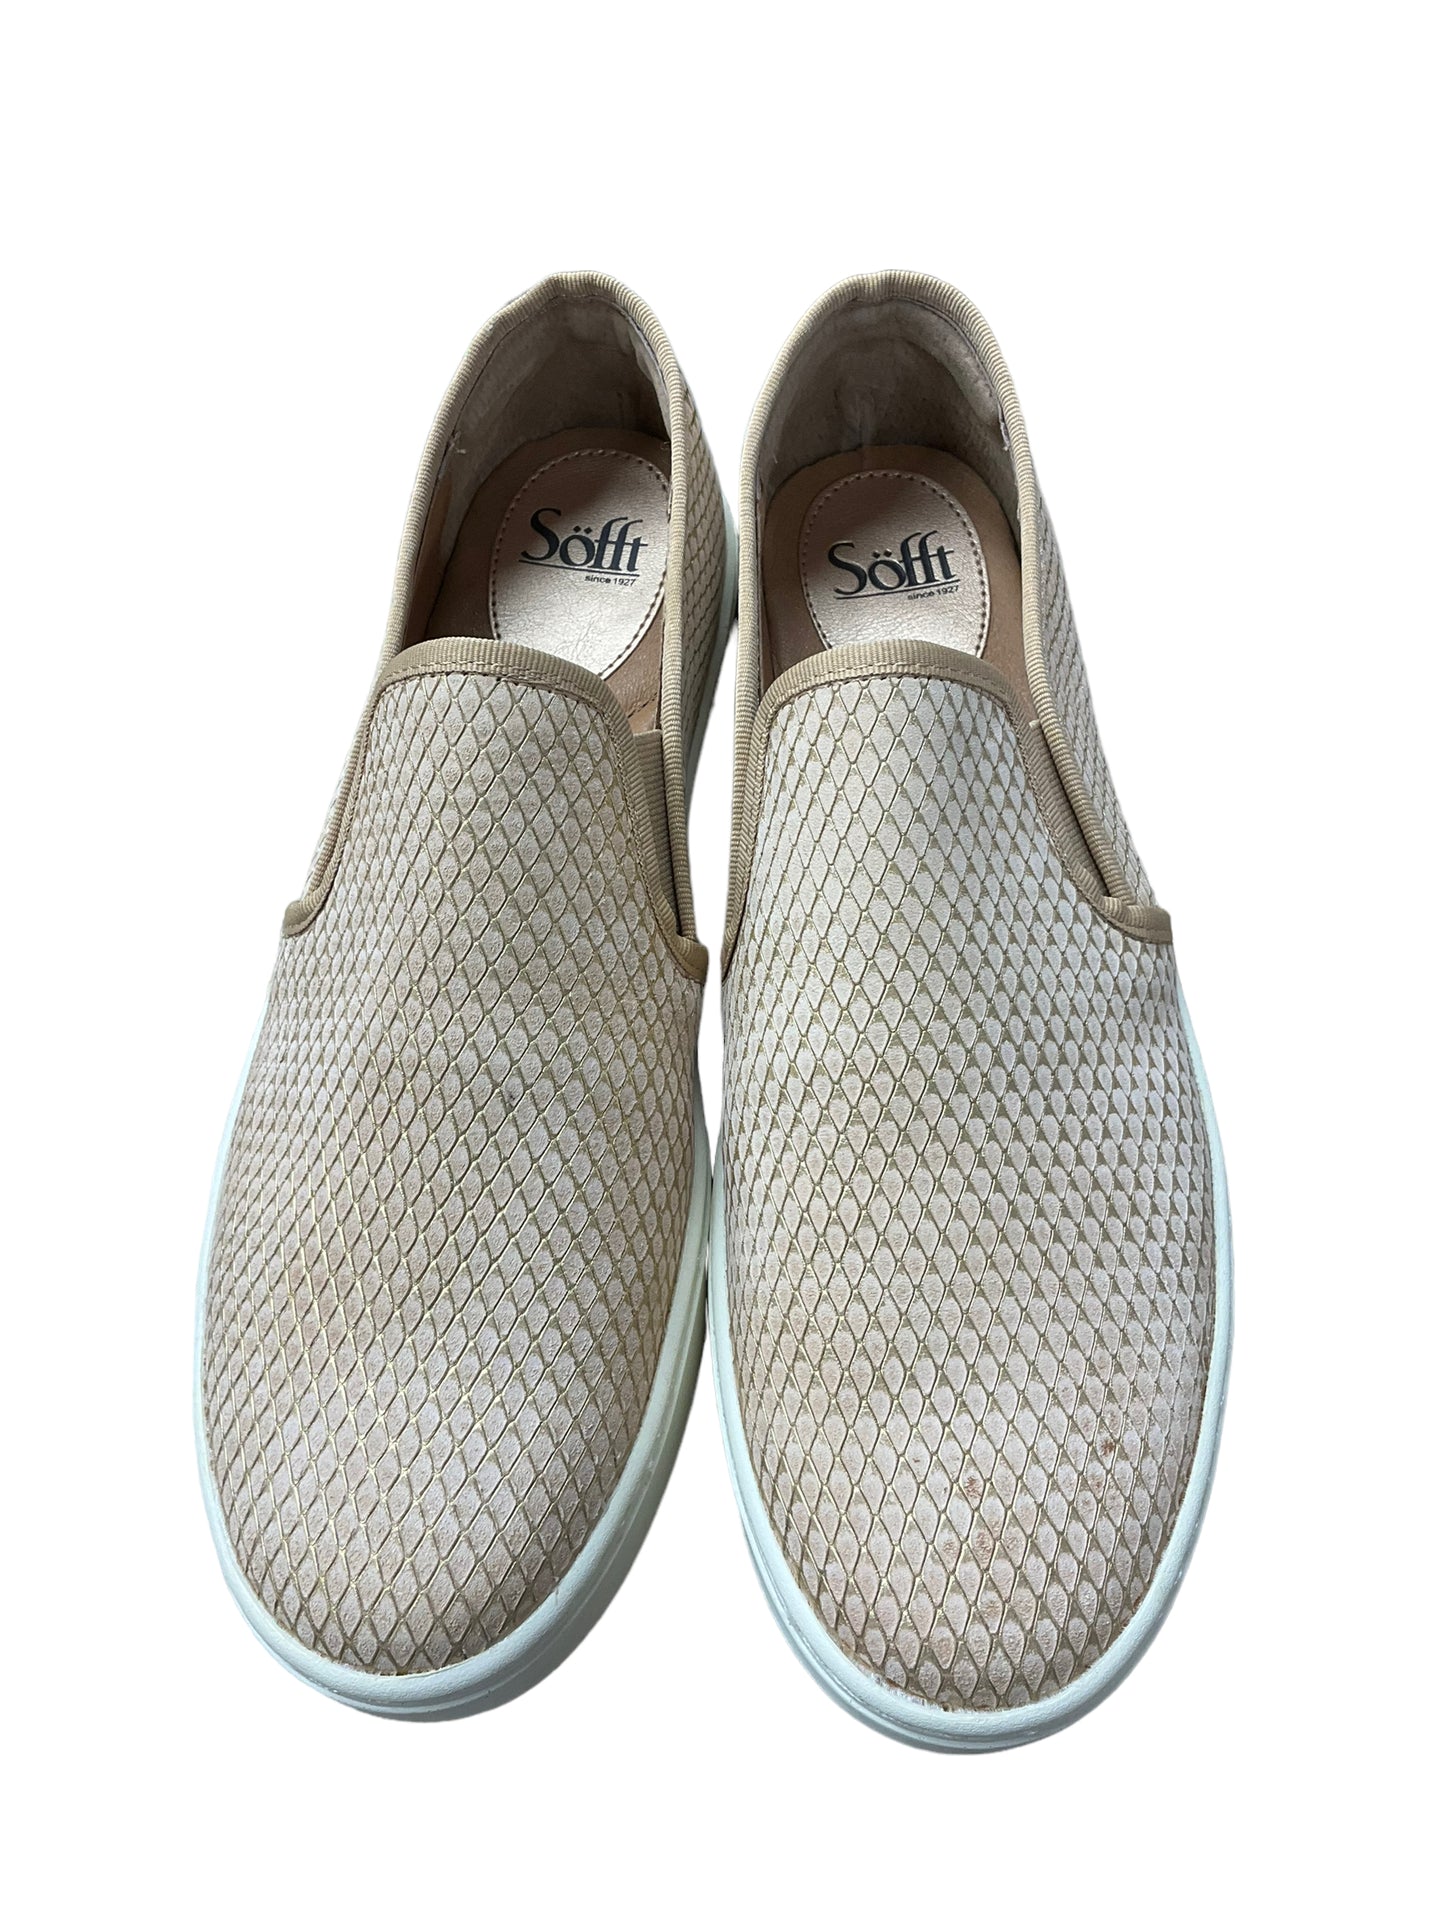 Shoes Flats Boat By Sofft  Size: 11